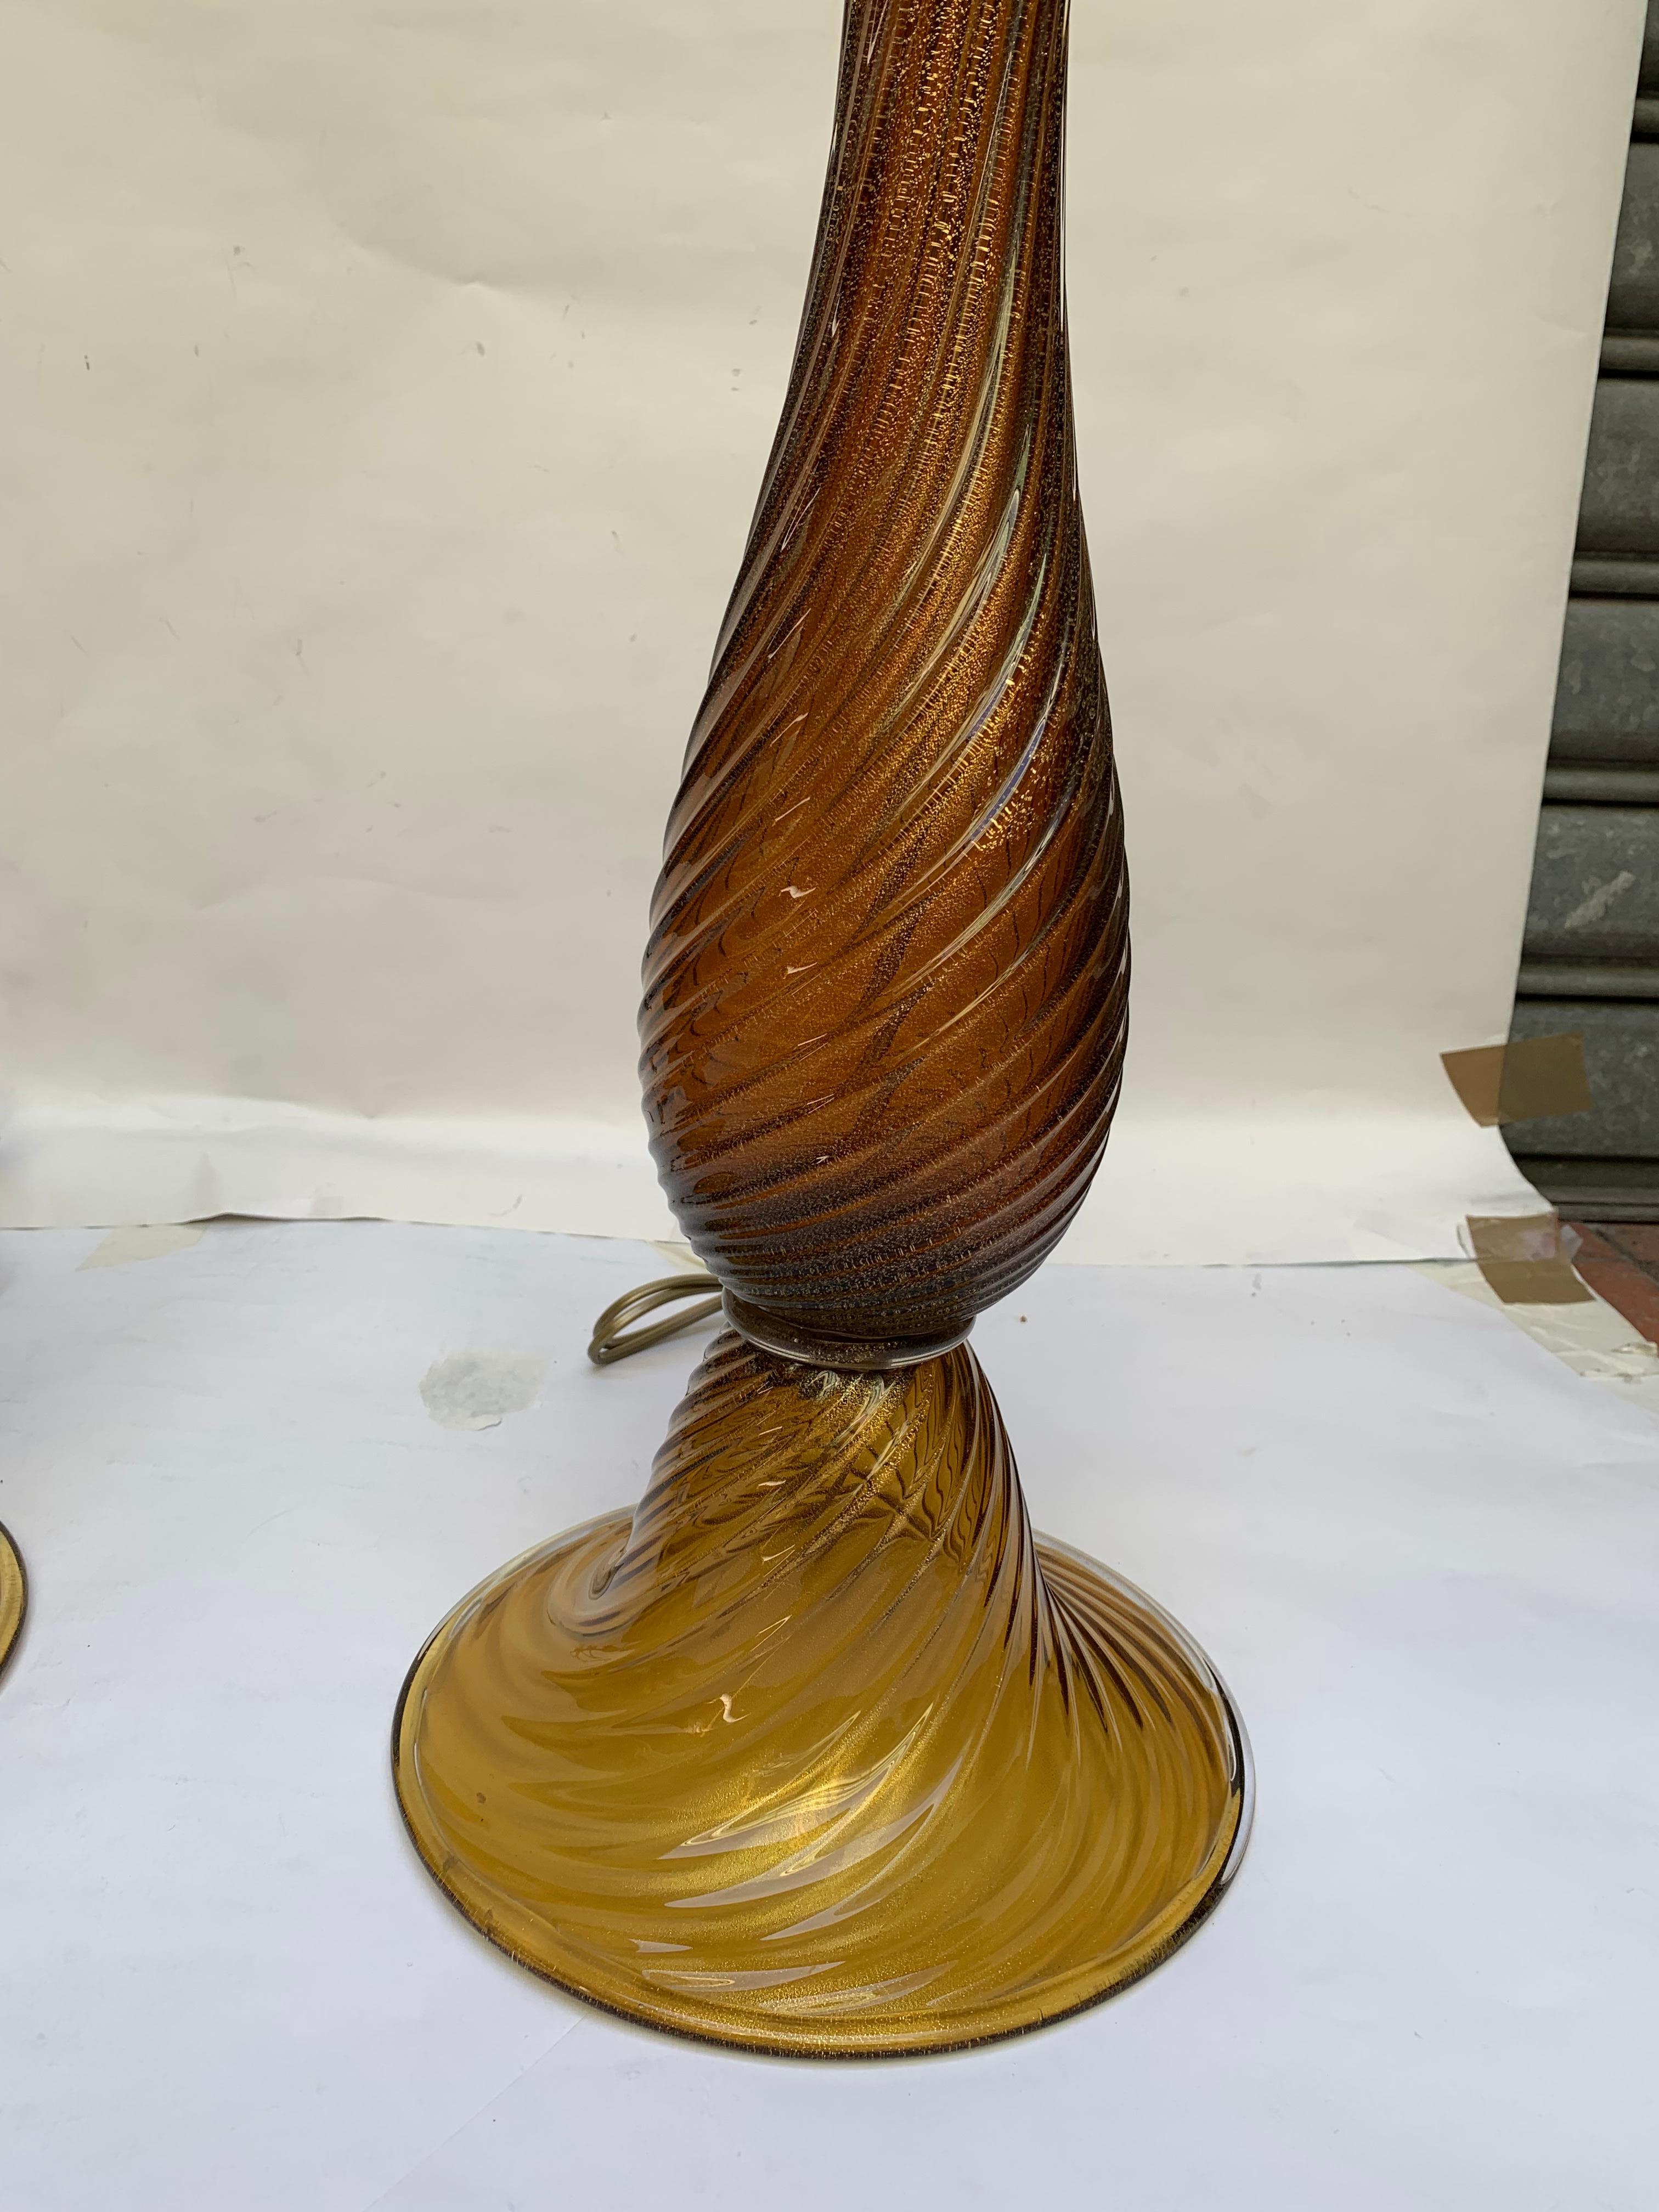 Pair of table lamps in Murano glass signed “Toso”.